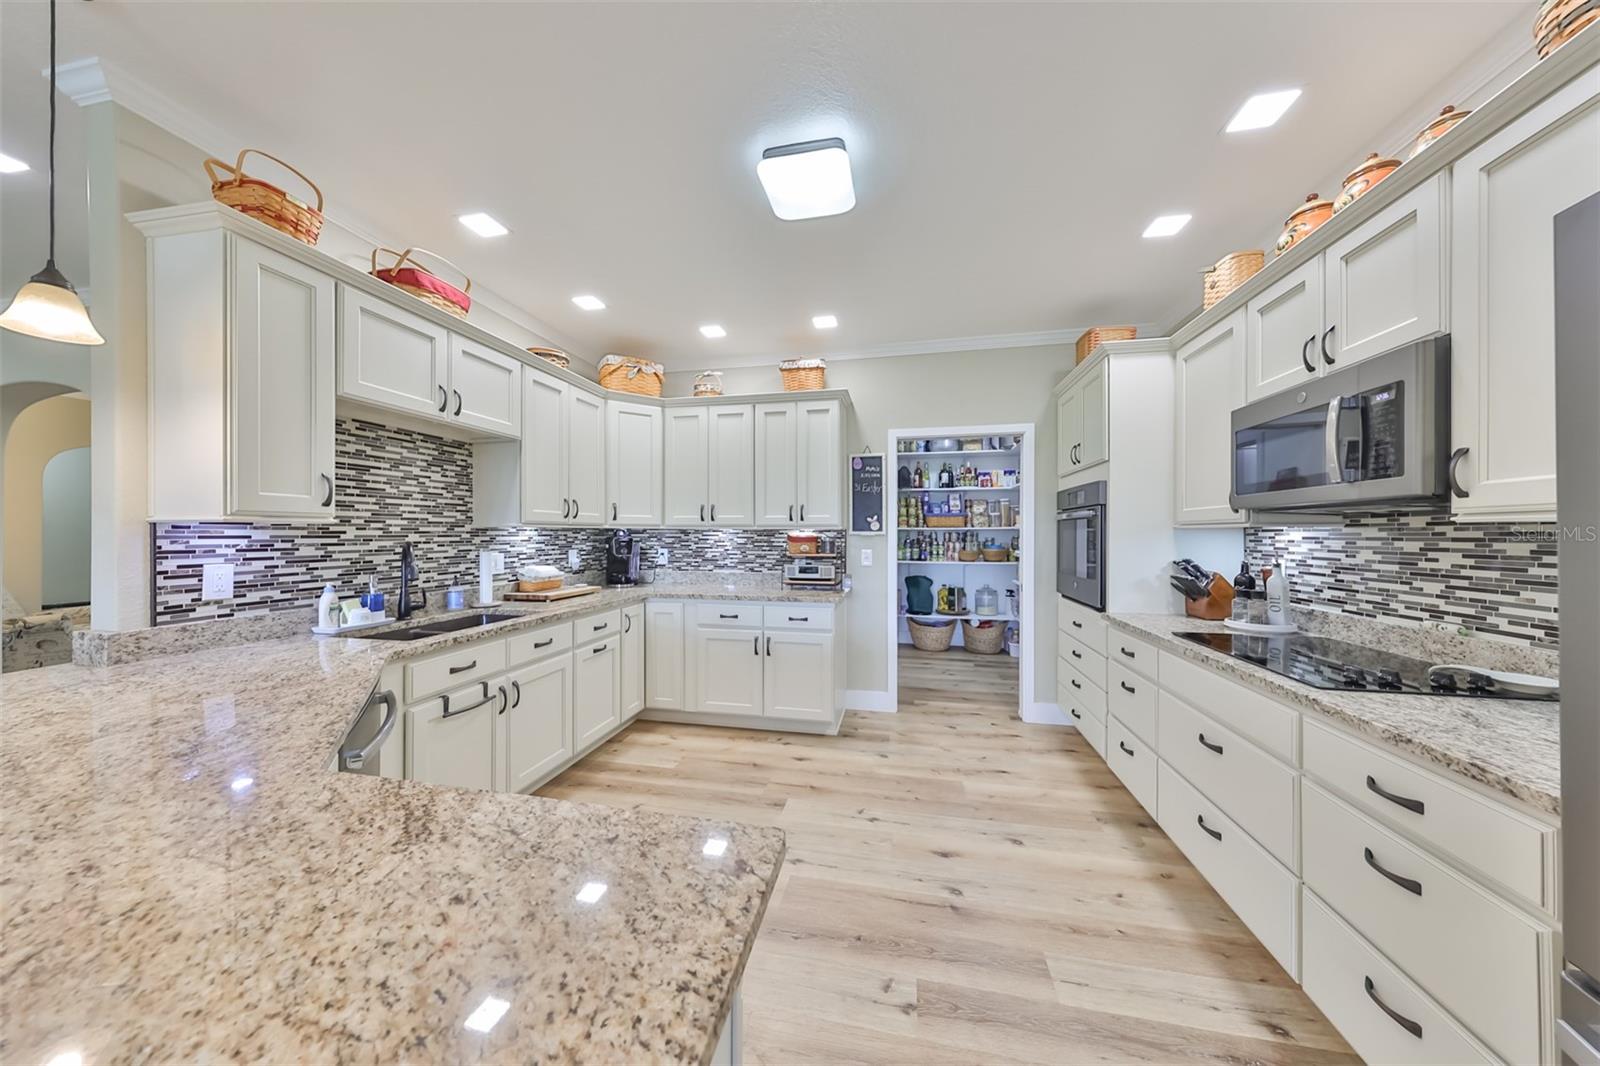 The kitchen features lots of extra cabinets for additional storage and matching flooring throughout. And on oversized pantry room with maximum storage and shelving!